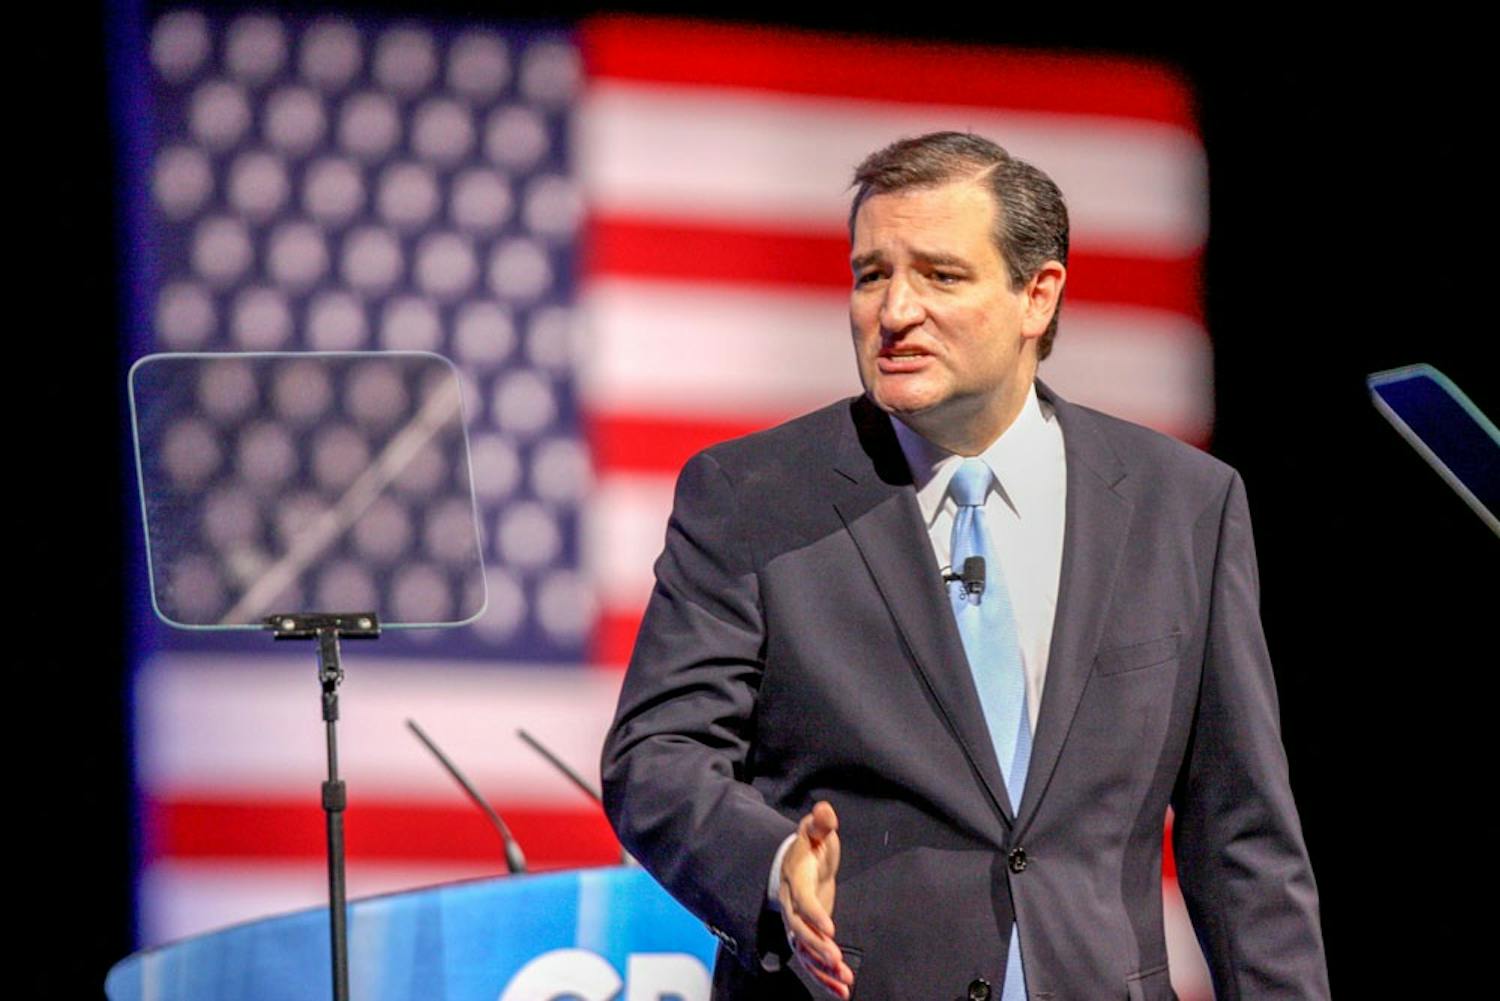 Republican presidential candidate&nbsp;Ted Cruz is set to speak at UB's Katharine Cornell Theatre on Thursday morning.&nbsp;